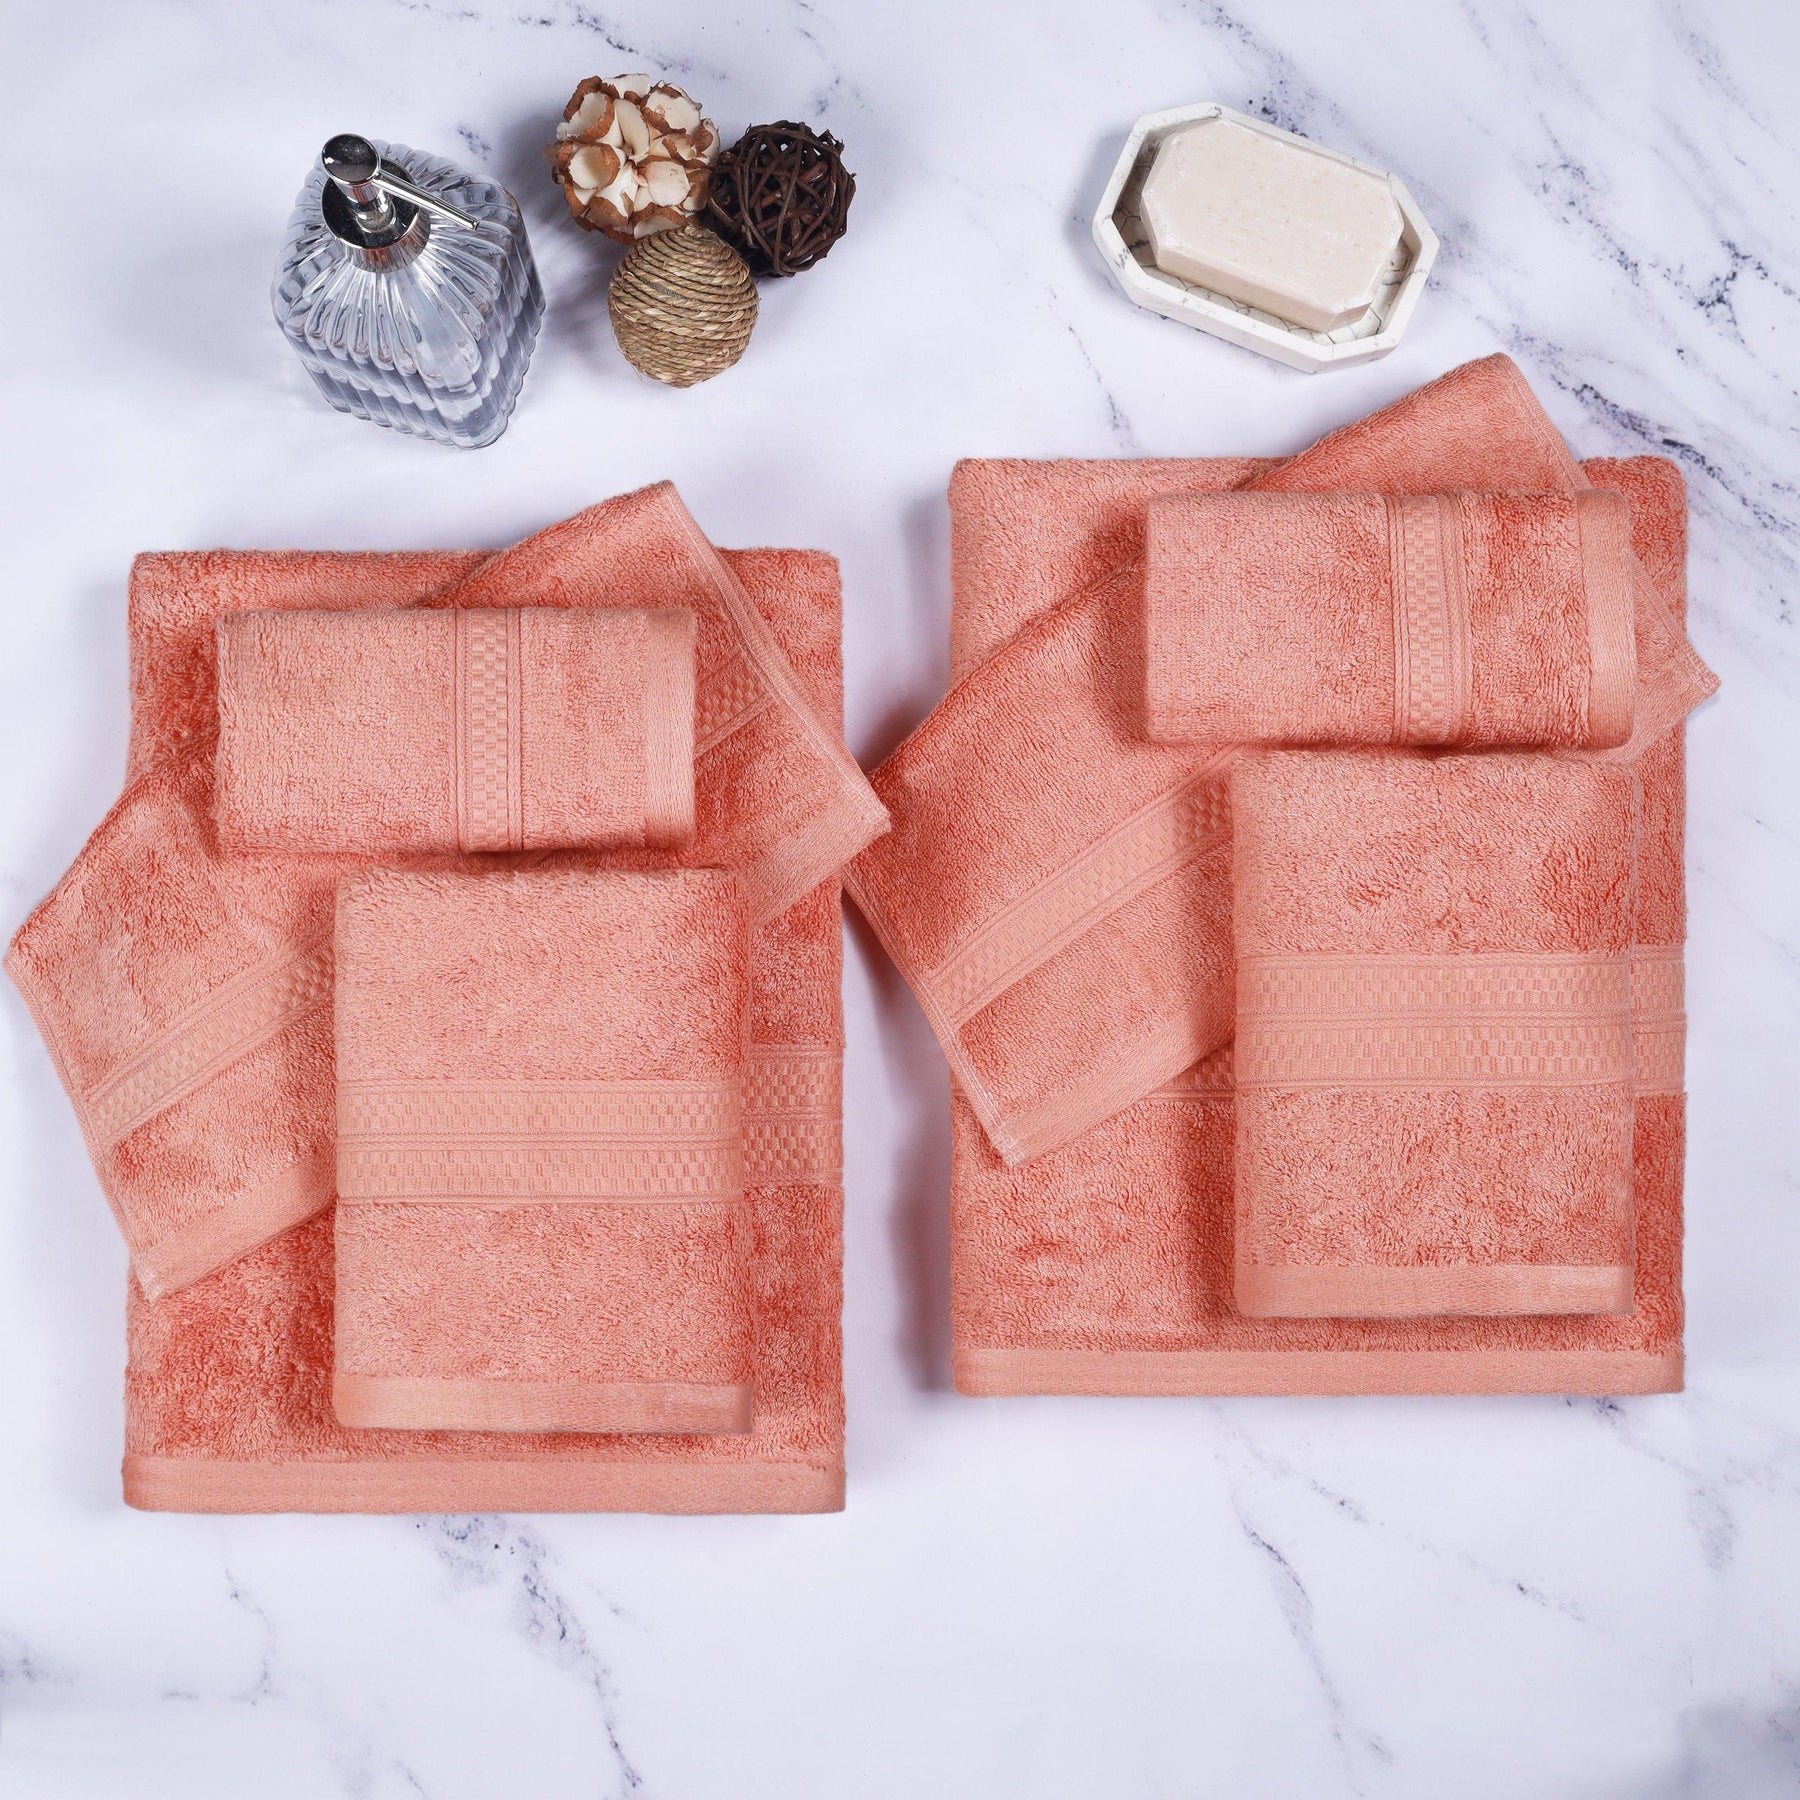  Ultra-Soft Hypoallergenic Rayon from Bamboo Cotton Blend Assorted Bath Towel Set -  Salmon